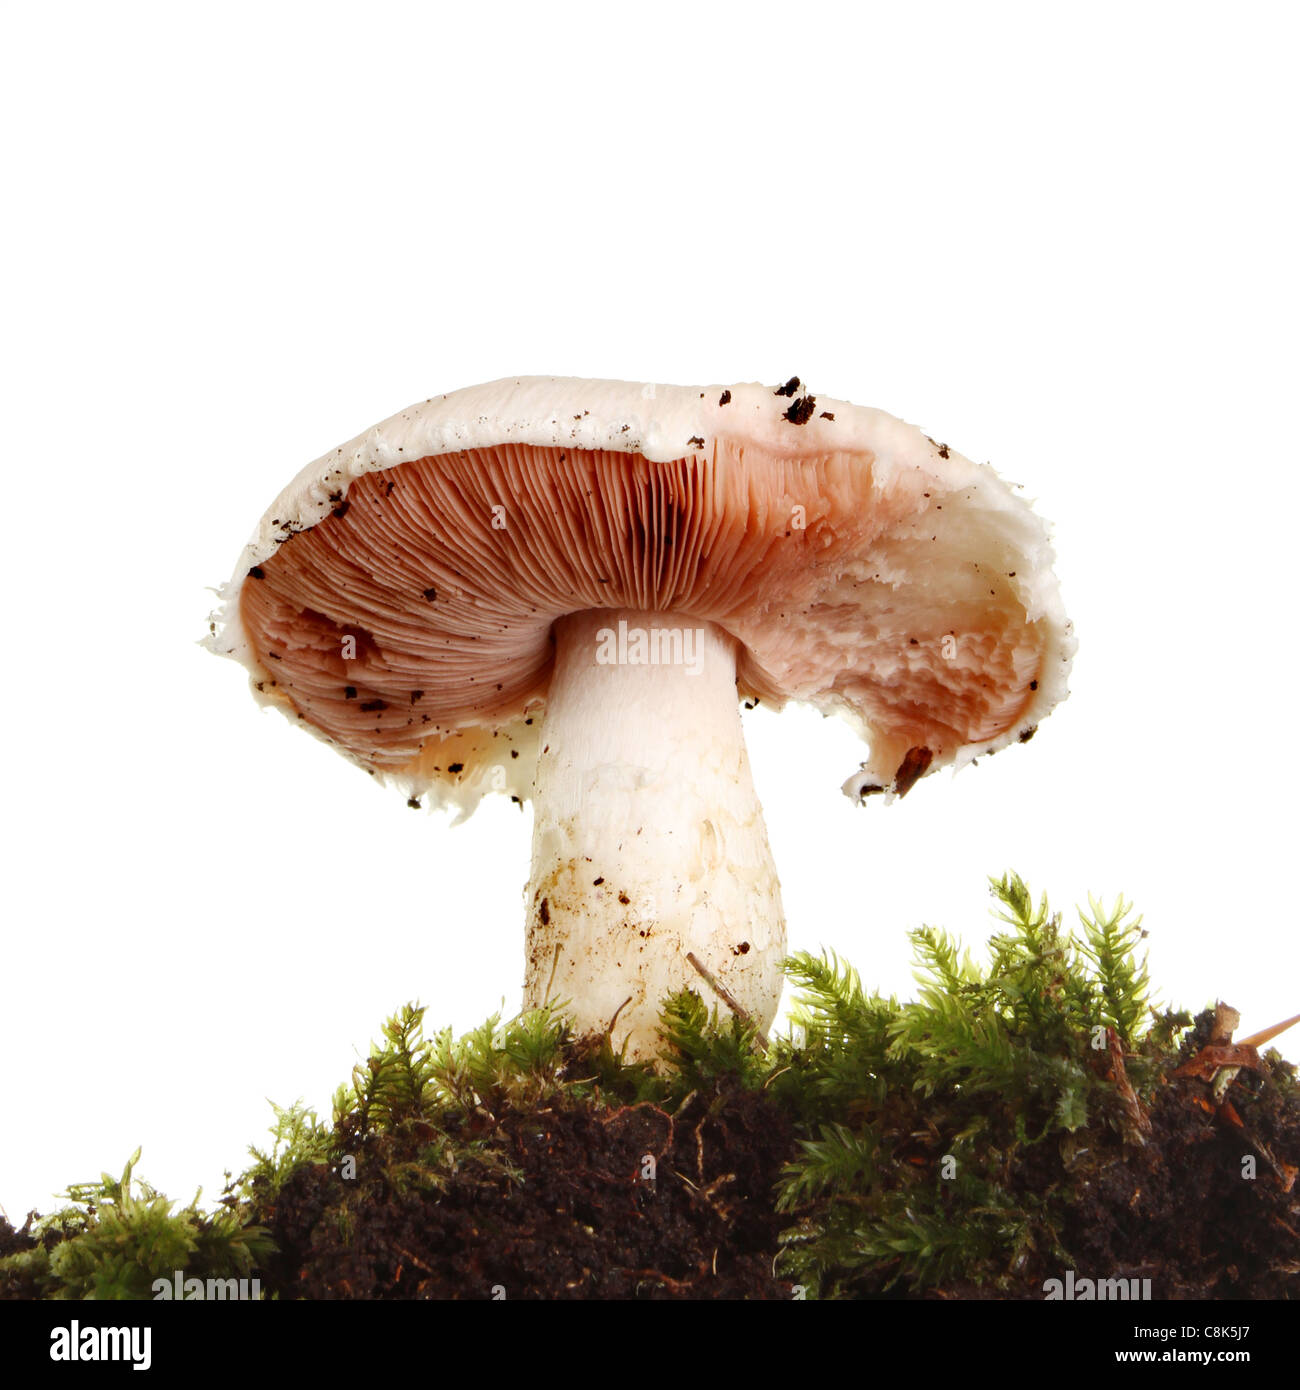 Closeup of wild mushroom growing among moss seen from a low angle Stock Photo